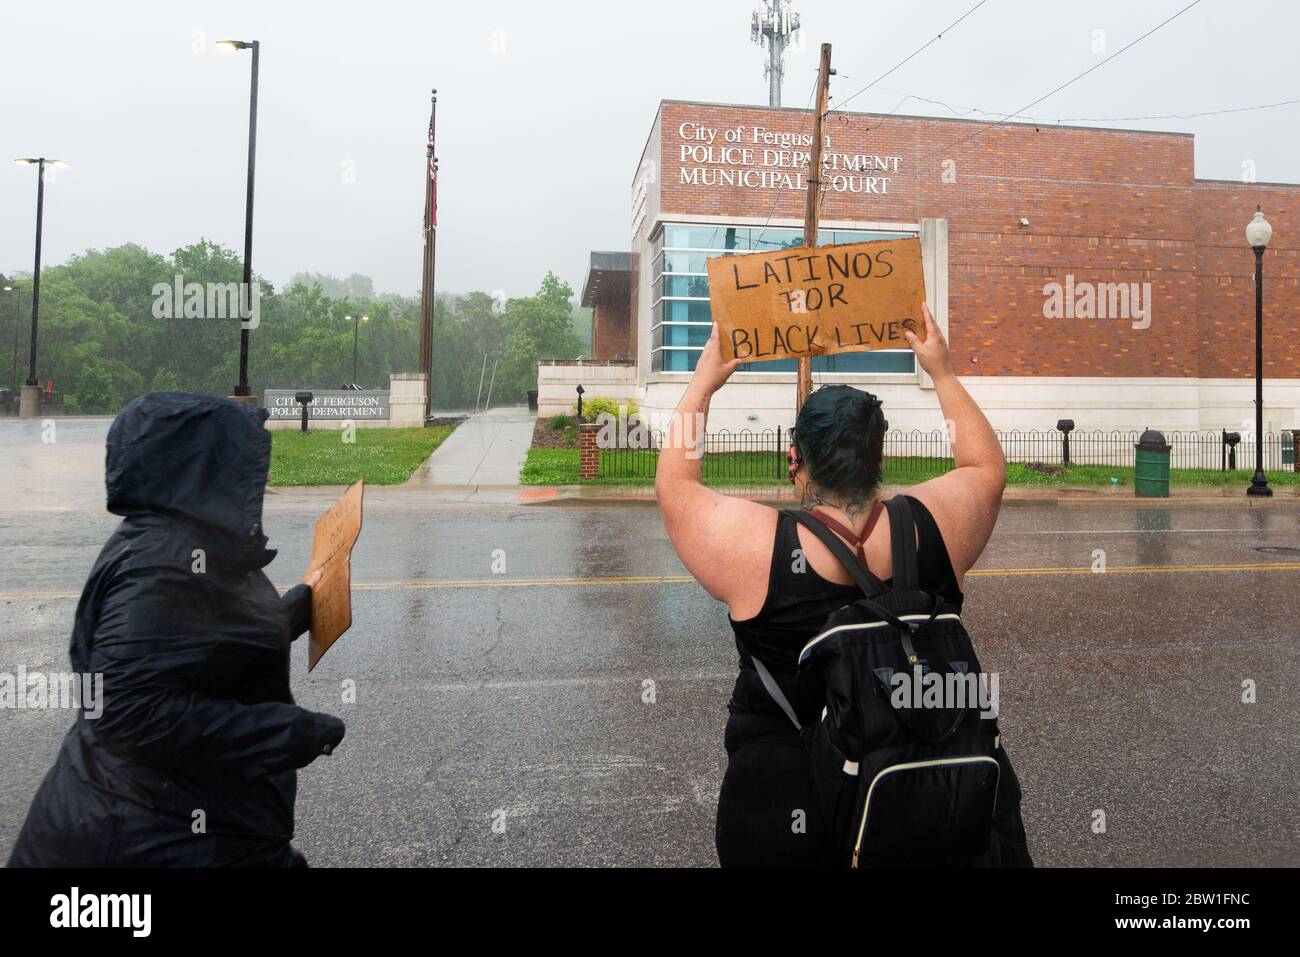 Ferguson, Missouri, USA. 28th May, 2020. People gather outside the Ferguson Police Department to protest the Minneapolis Police killing of George Floyd. Credit: James Cooper/ZUMA Wire/Alamy Live News Stock Photo